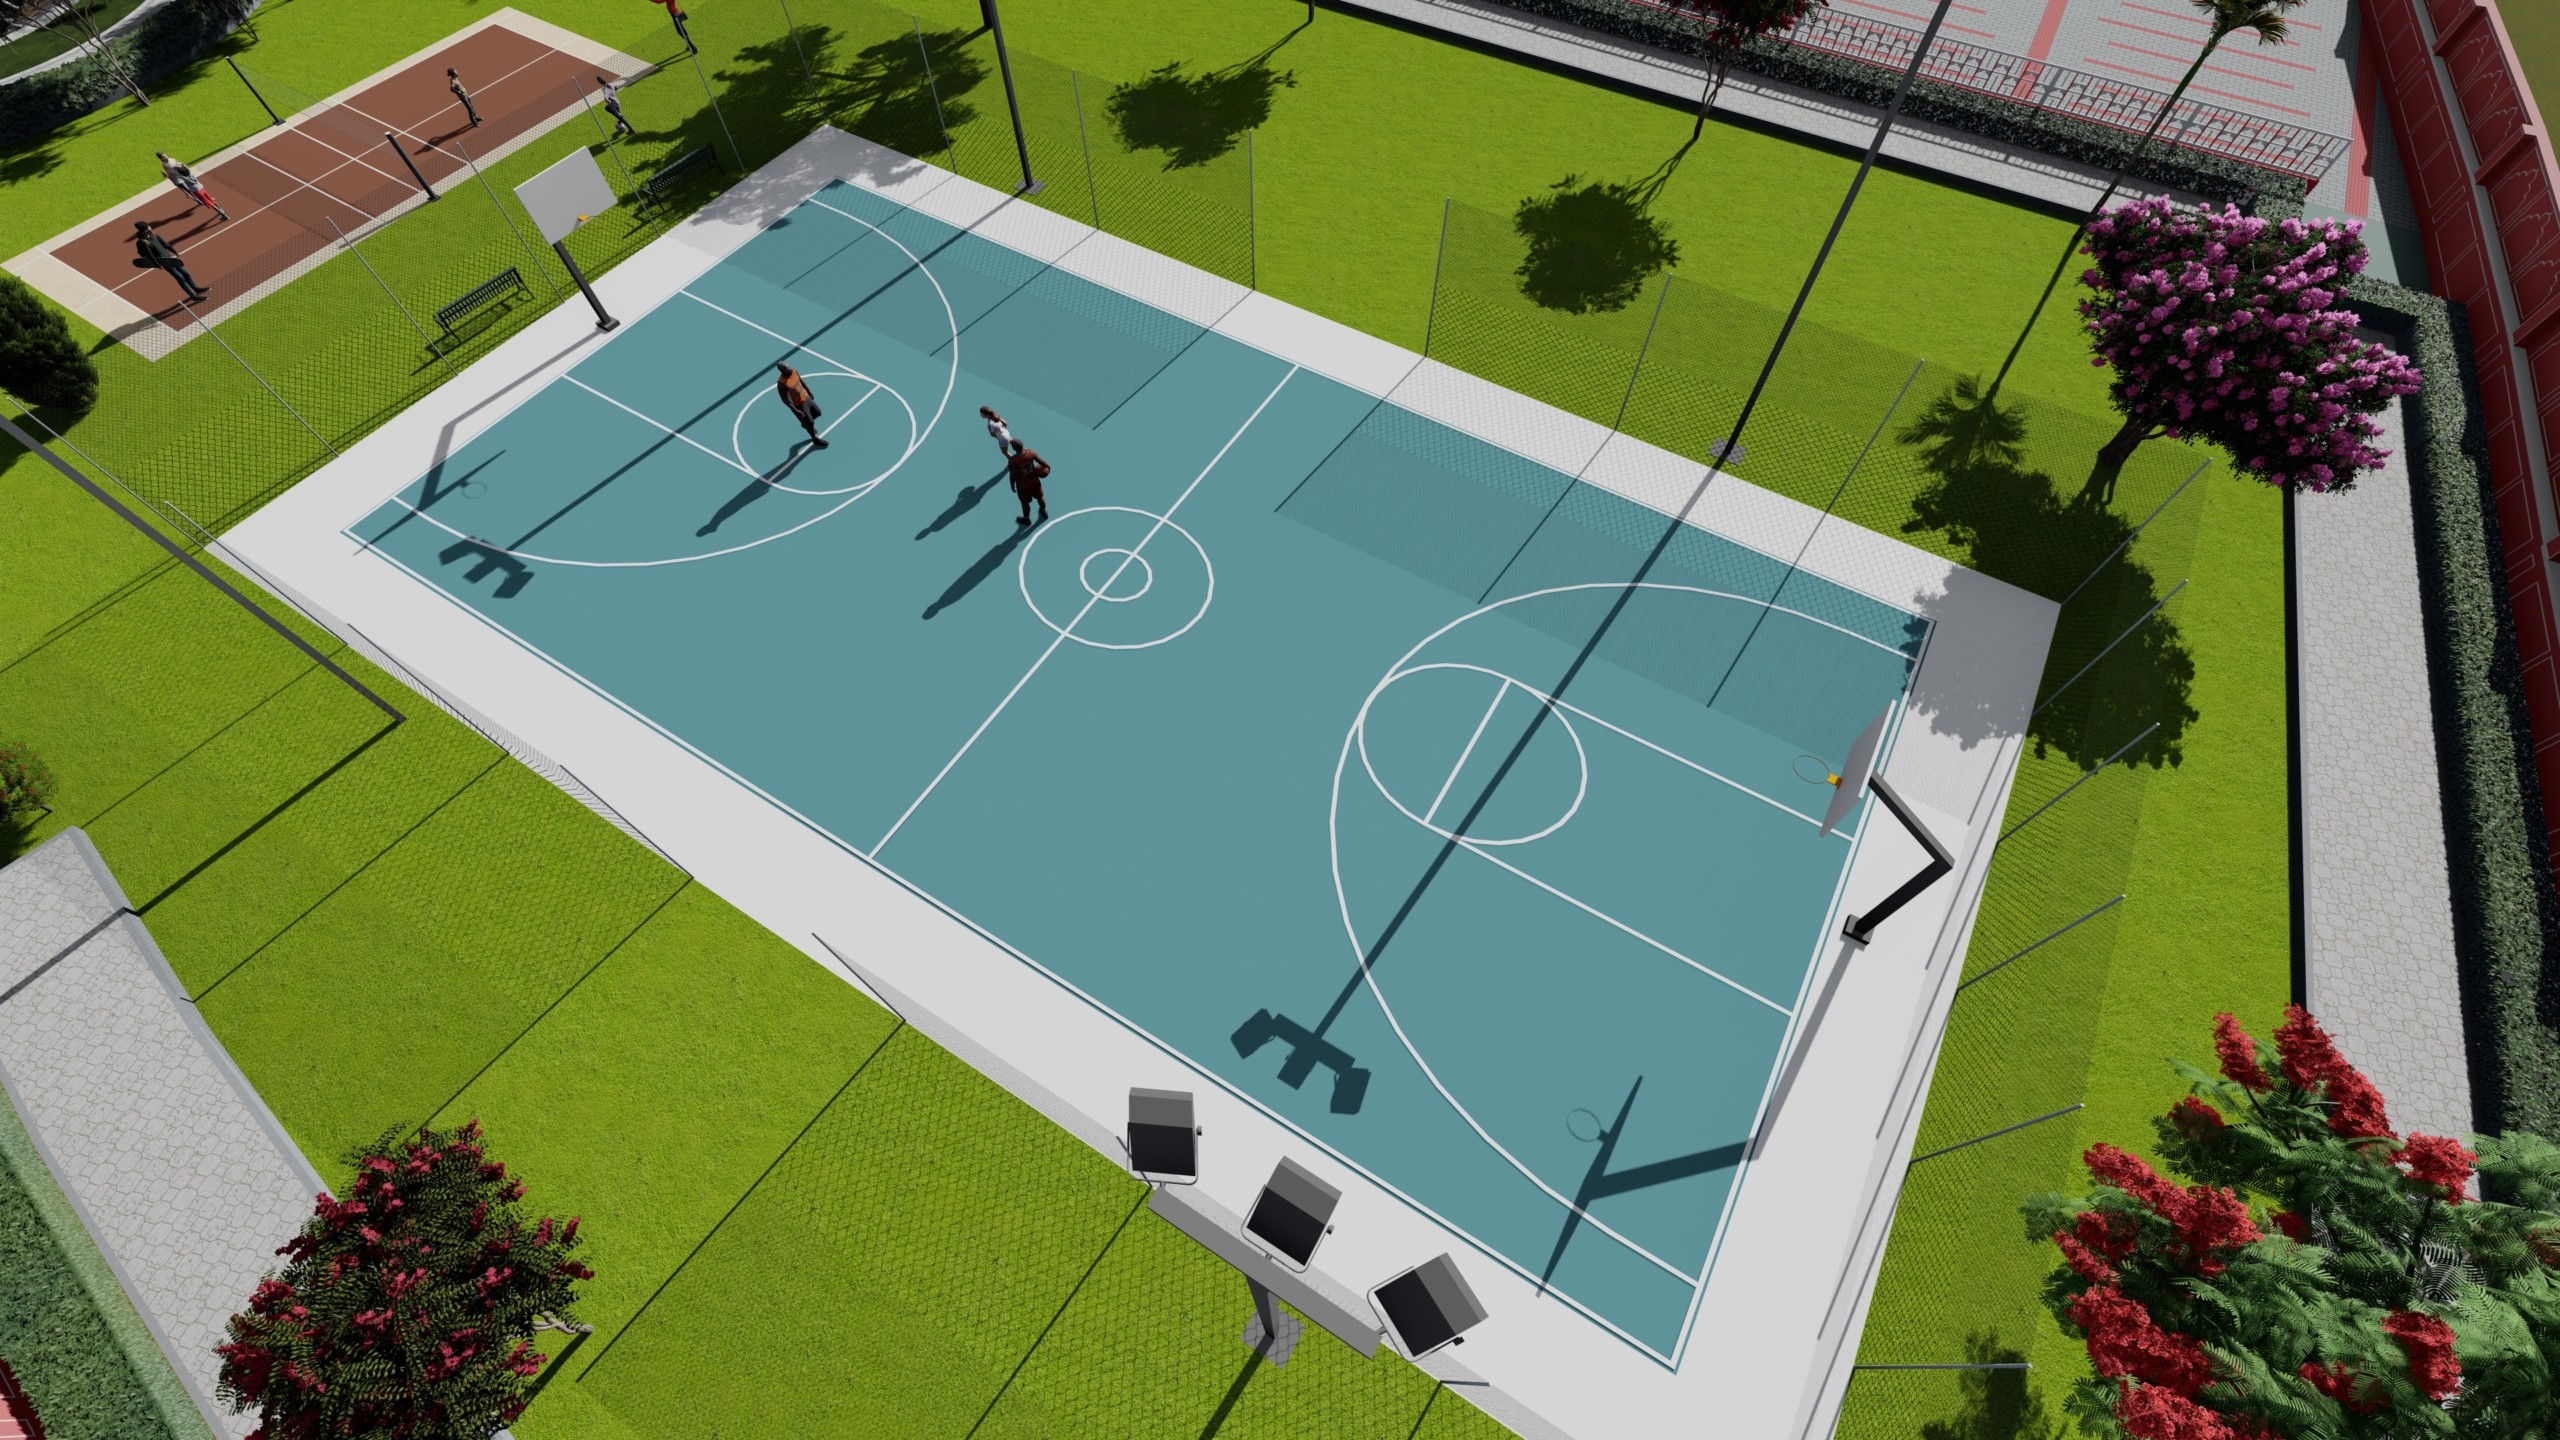 Play court